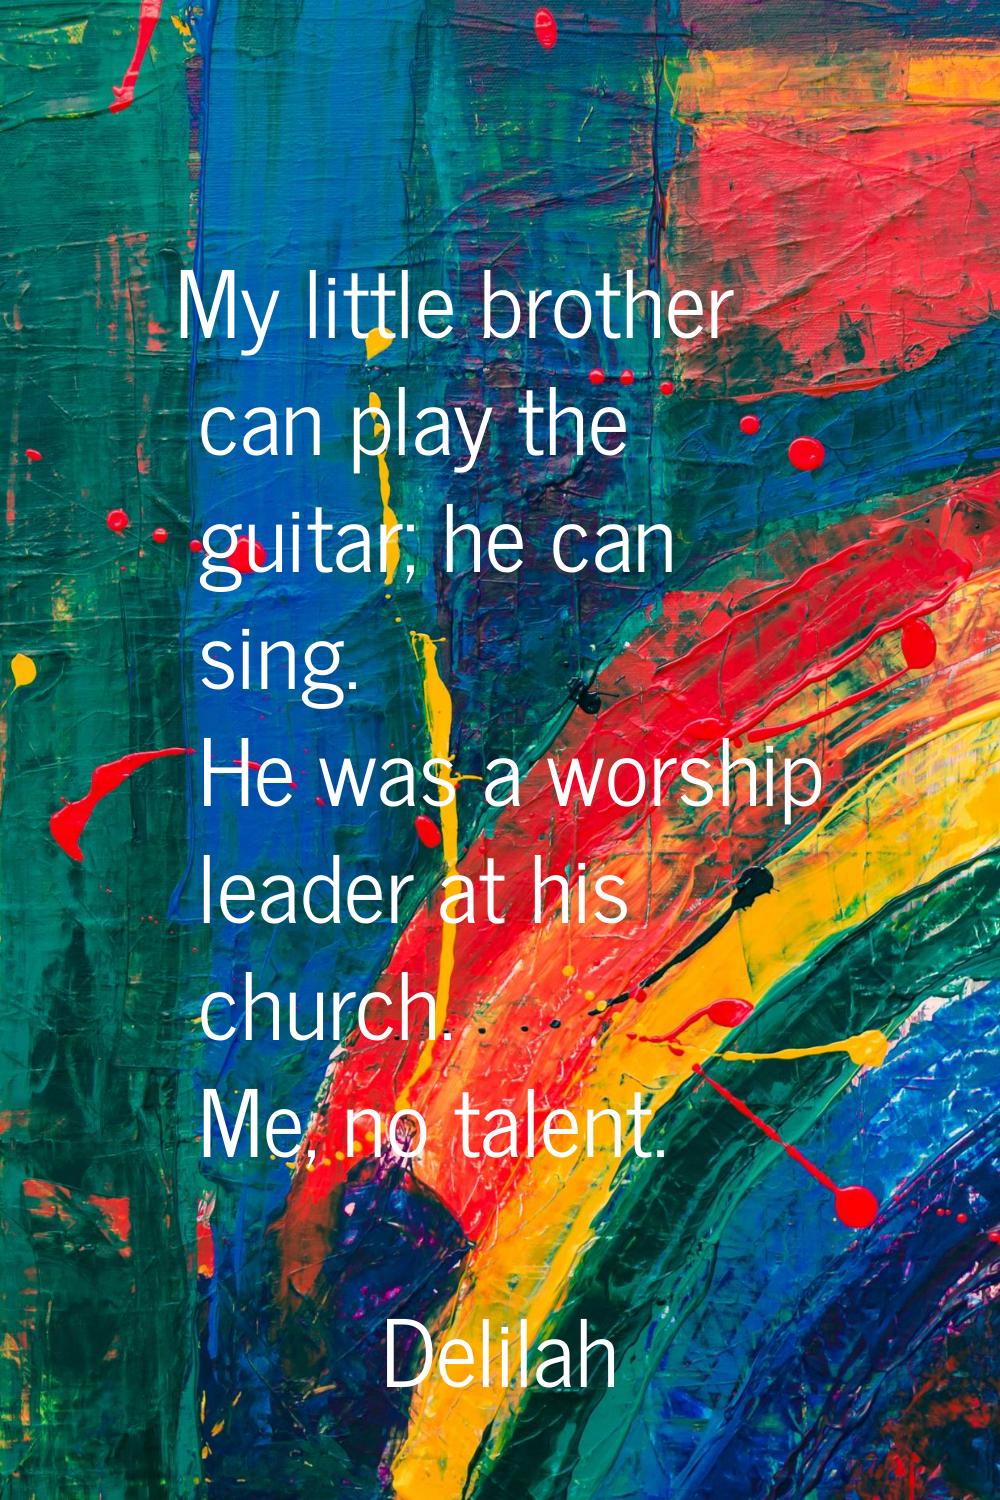 My little brother can play the guitar; he can sing. He was a worship leader at his church. Me, no t